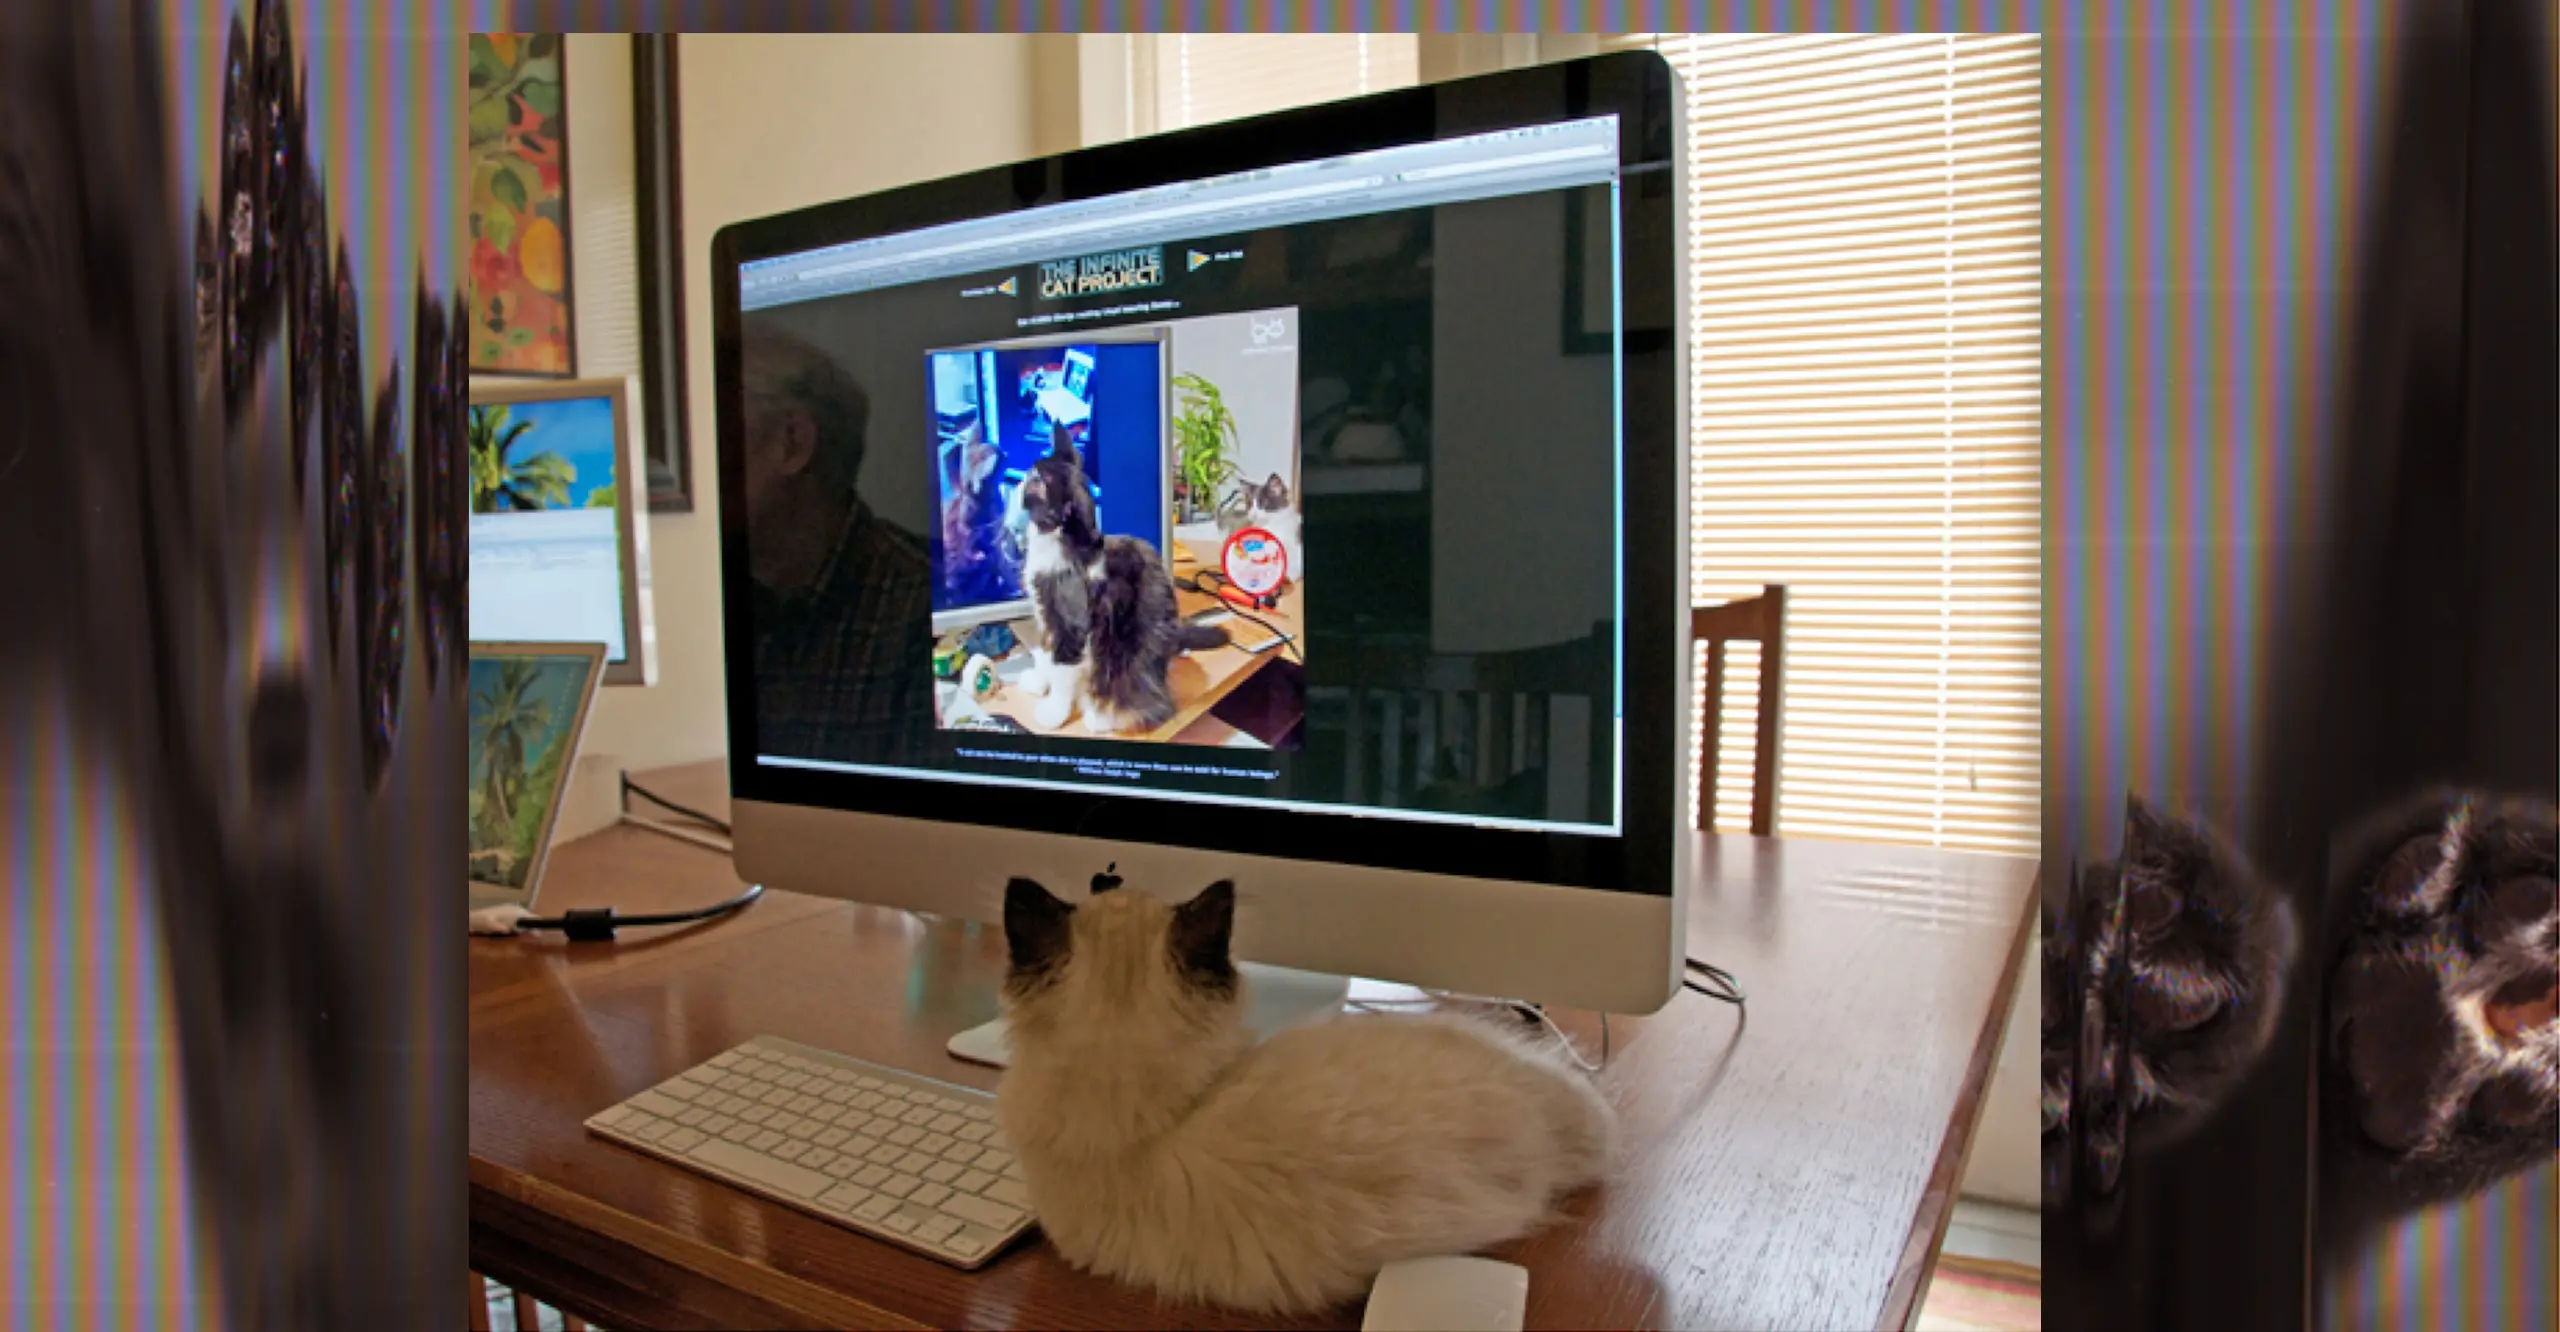 Curating the Networked Image - a cat is looking at a cat on a screen, looking at a cat on another screen